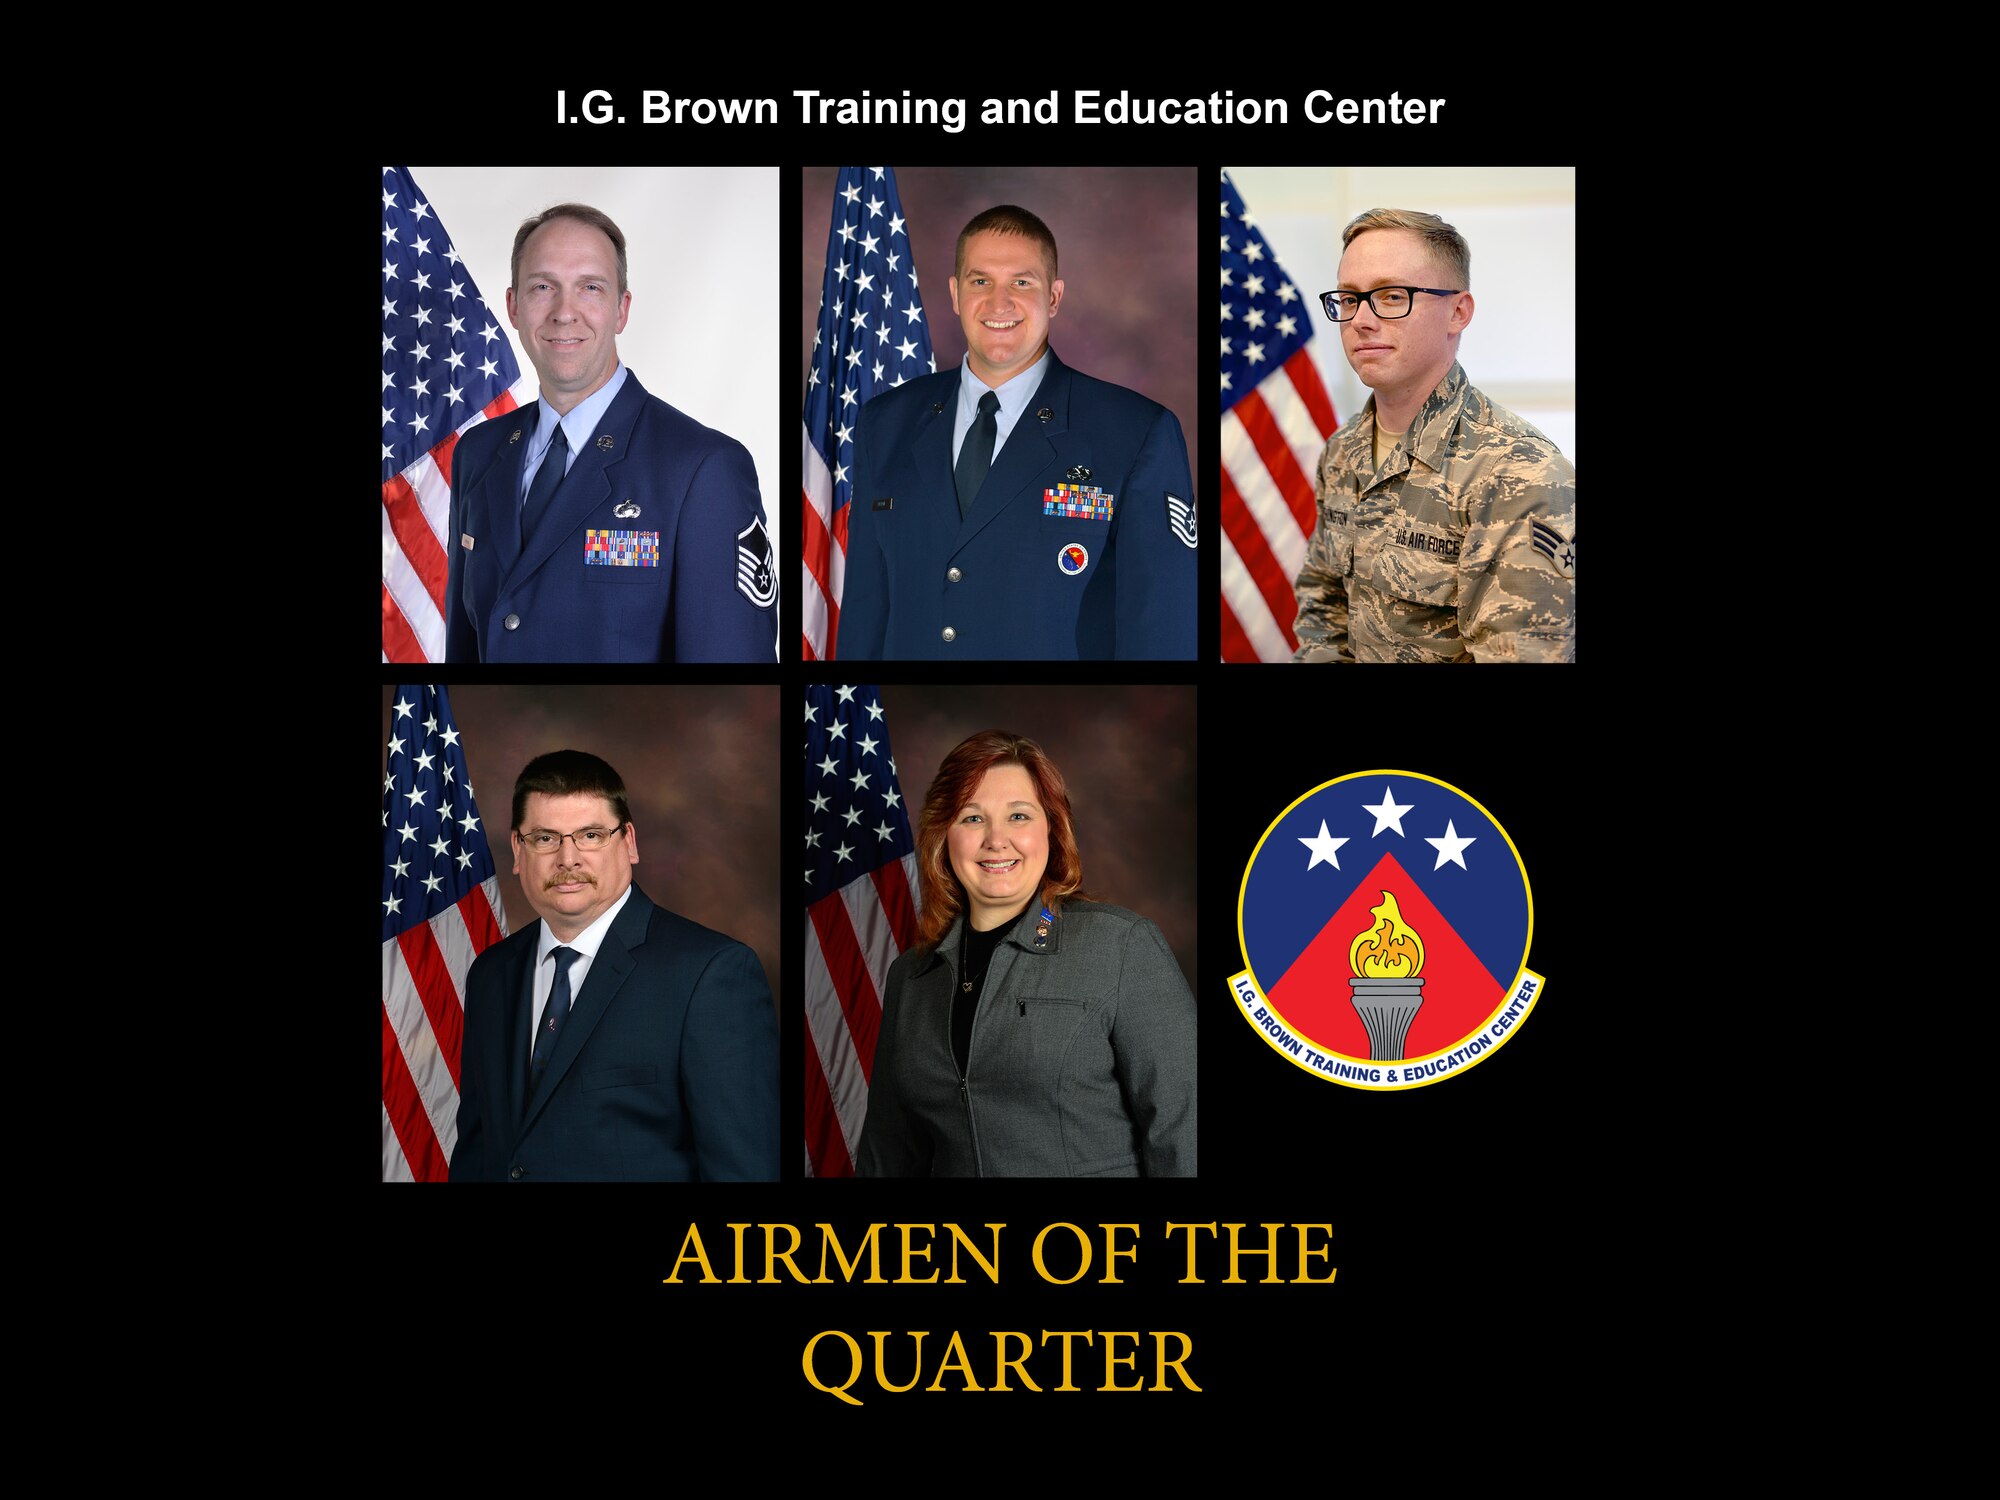 The I.G. Brown Training and Education Center Airmen of the Second Quarter, 2017, from top, left, Senior NCO of the Quarter Master Sgt.  Timothy Kinnan; NCO of the Quarter, Tech. Sgt. Jacob L. Sutton; Airman of the Quarter, Senior Airman David T. Wethington; Civilian of the Quarter Category III, Lawrence McCoy; Civilian of the Quarter Category II, Sabrina Tullock. (Air National Guard file photo illustration)